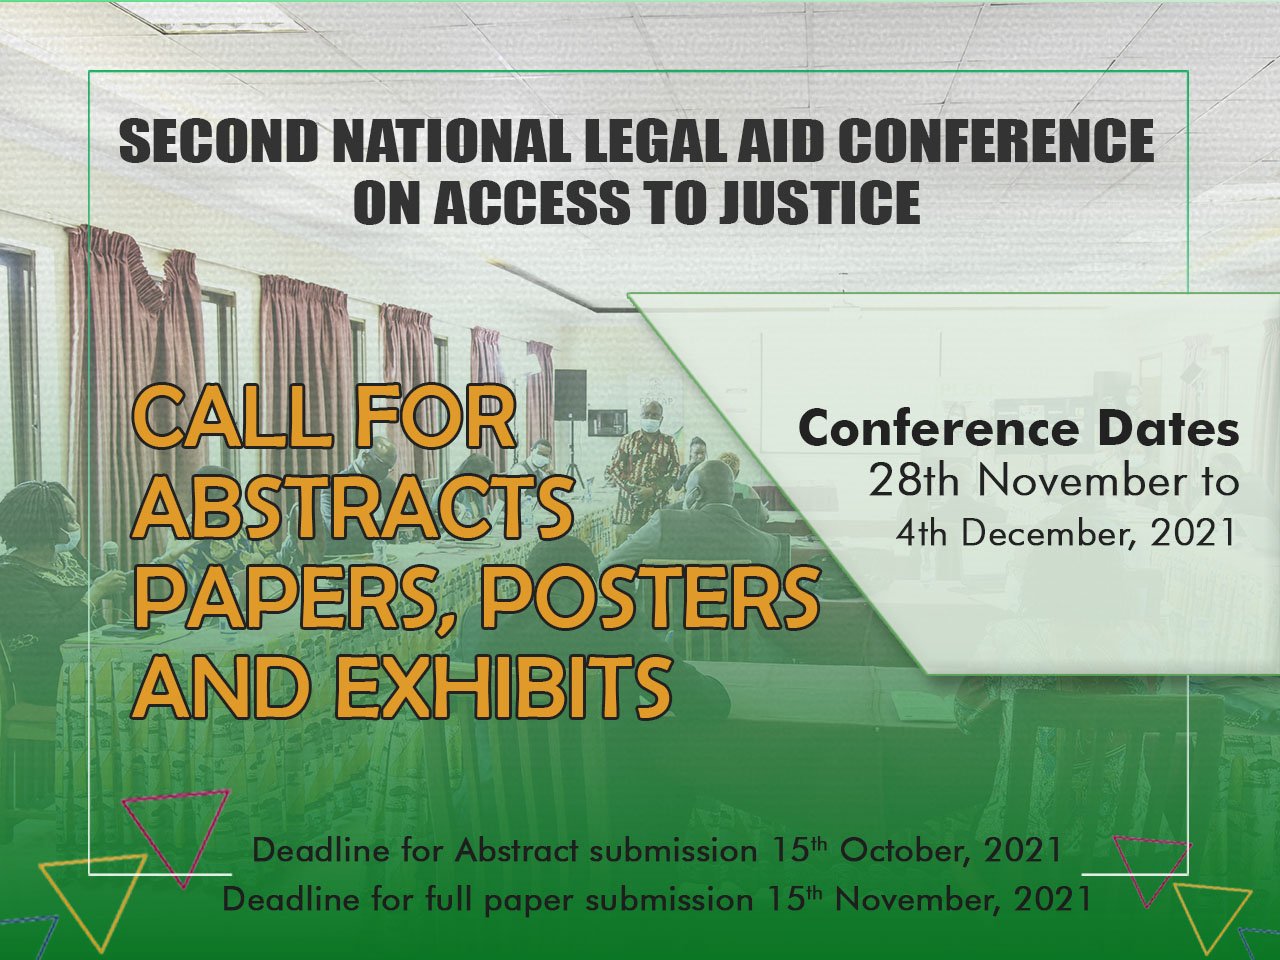 Call for Abstracts, Papers, Posters and Exhibits